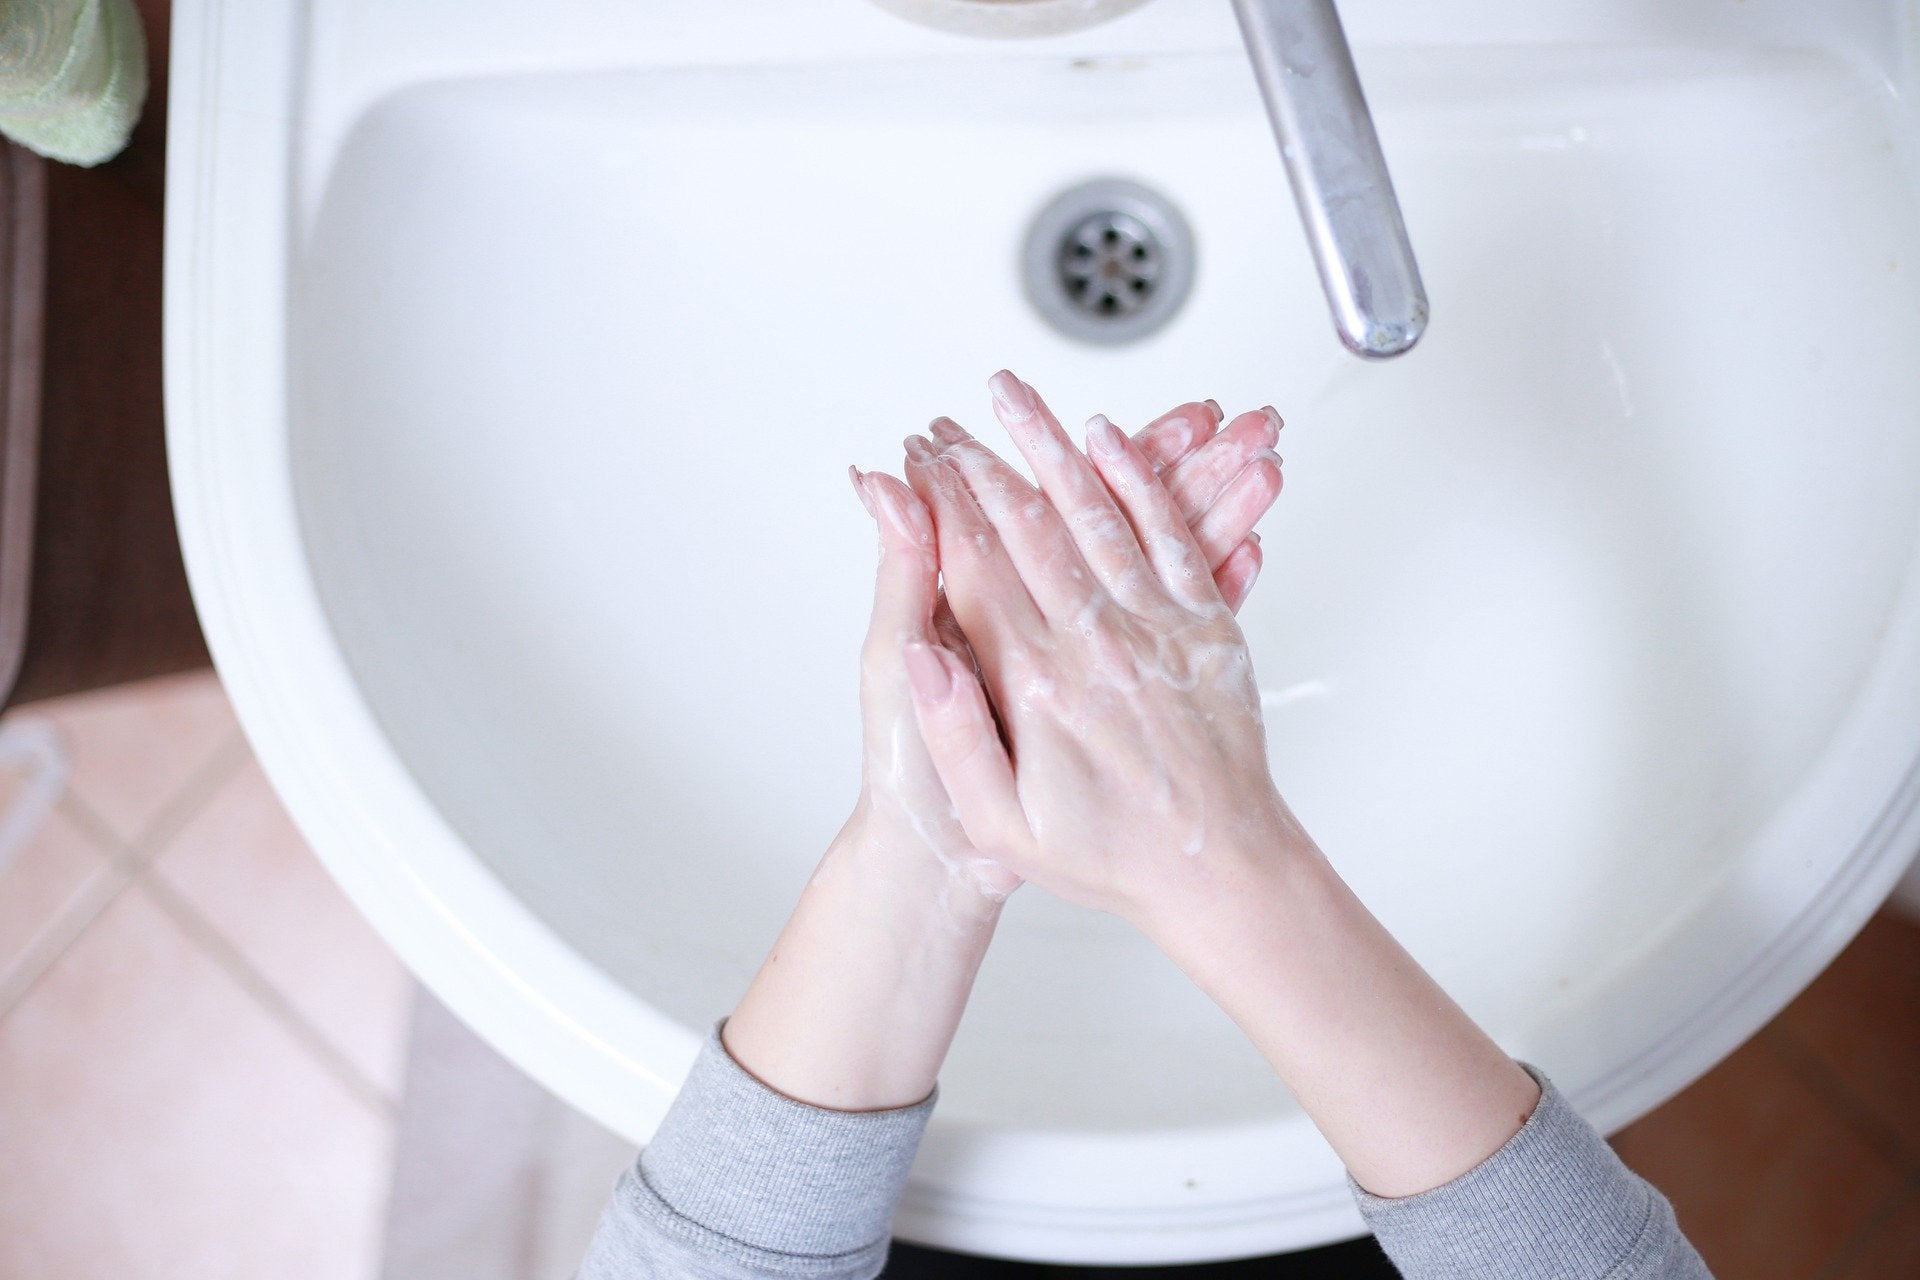 It is important to wash your hands after interacting in public and through out the day regularly to fight the spread of germs and to prevent contracting illnesses. 